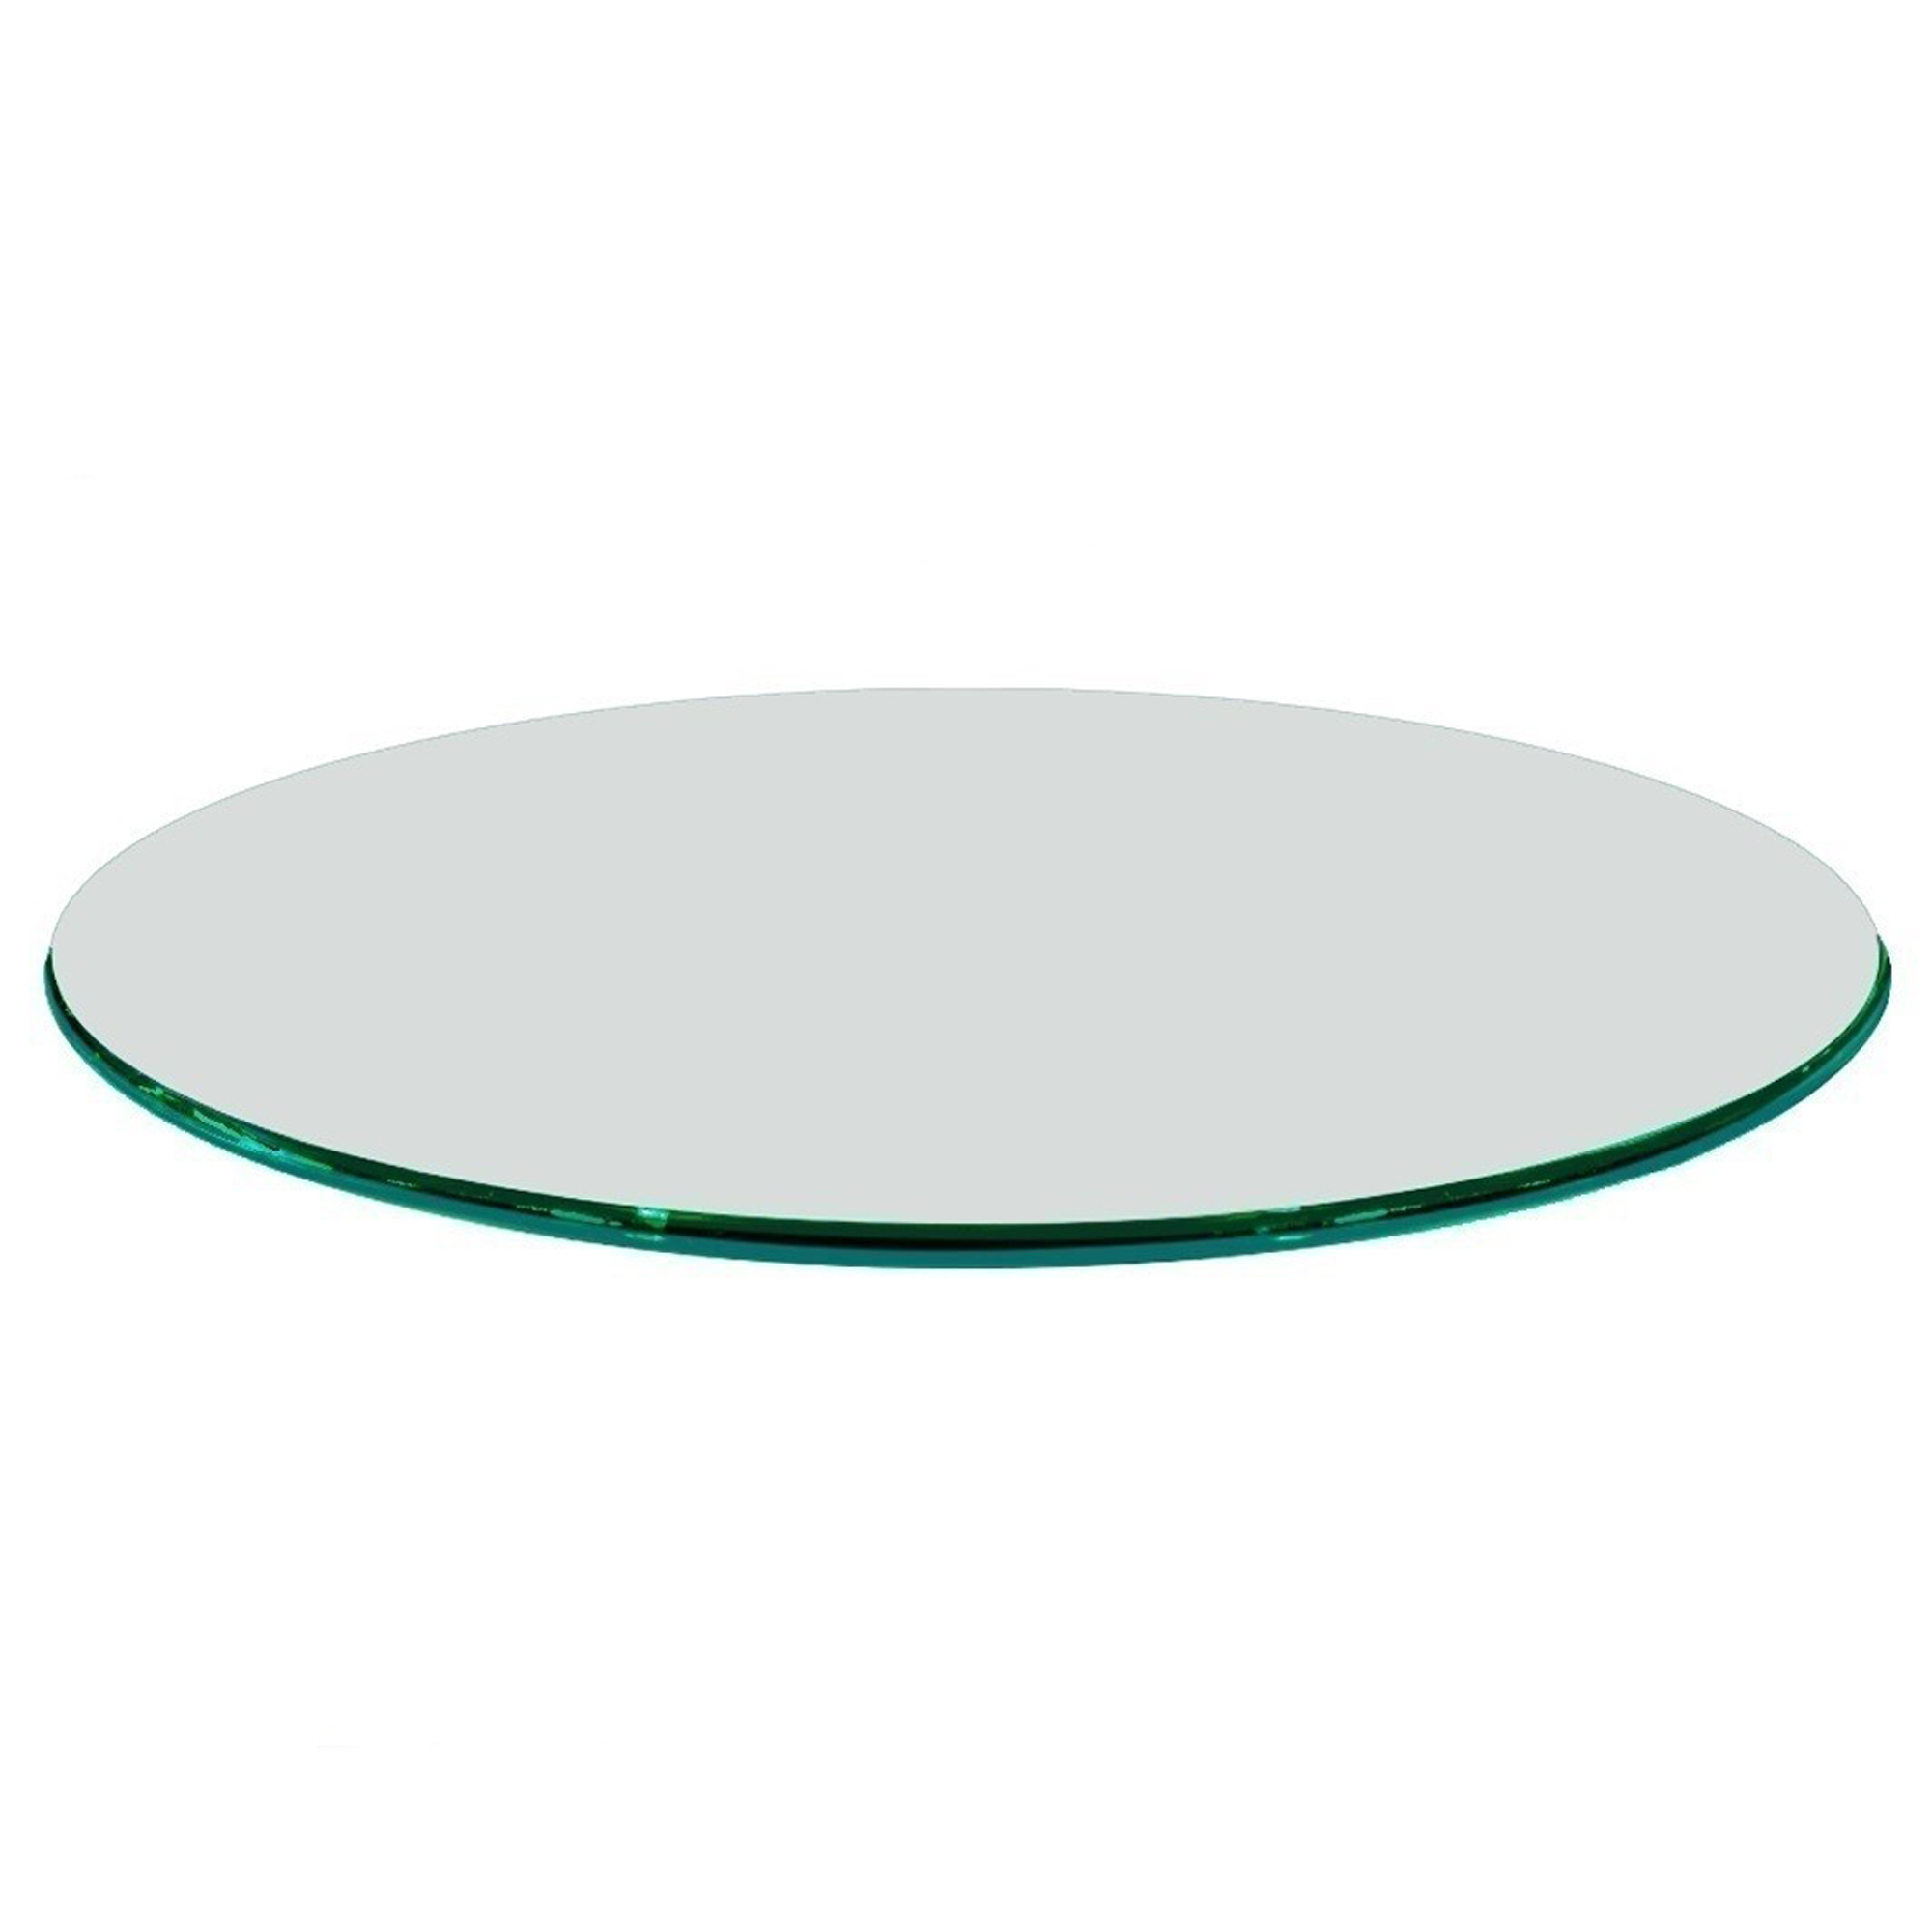 Round Glass Dining Table Tops, 60 Inch Round Glass Table Top Protector